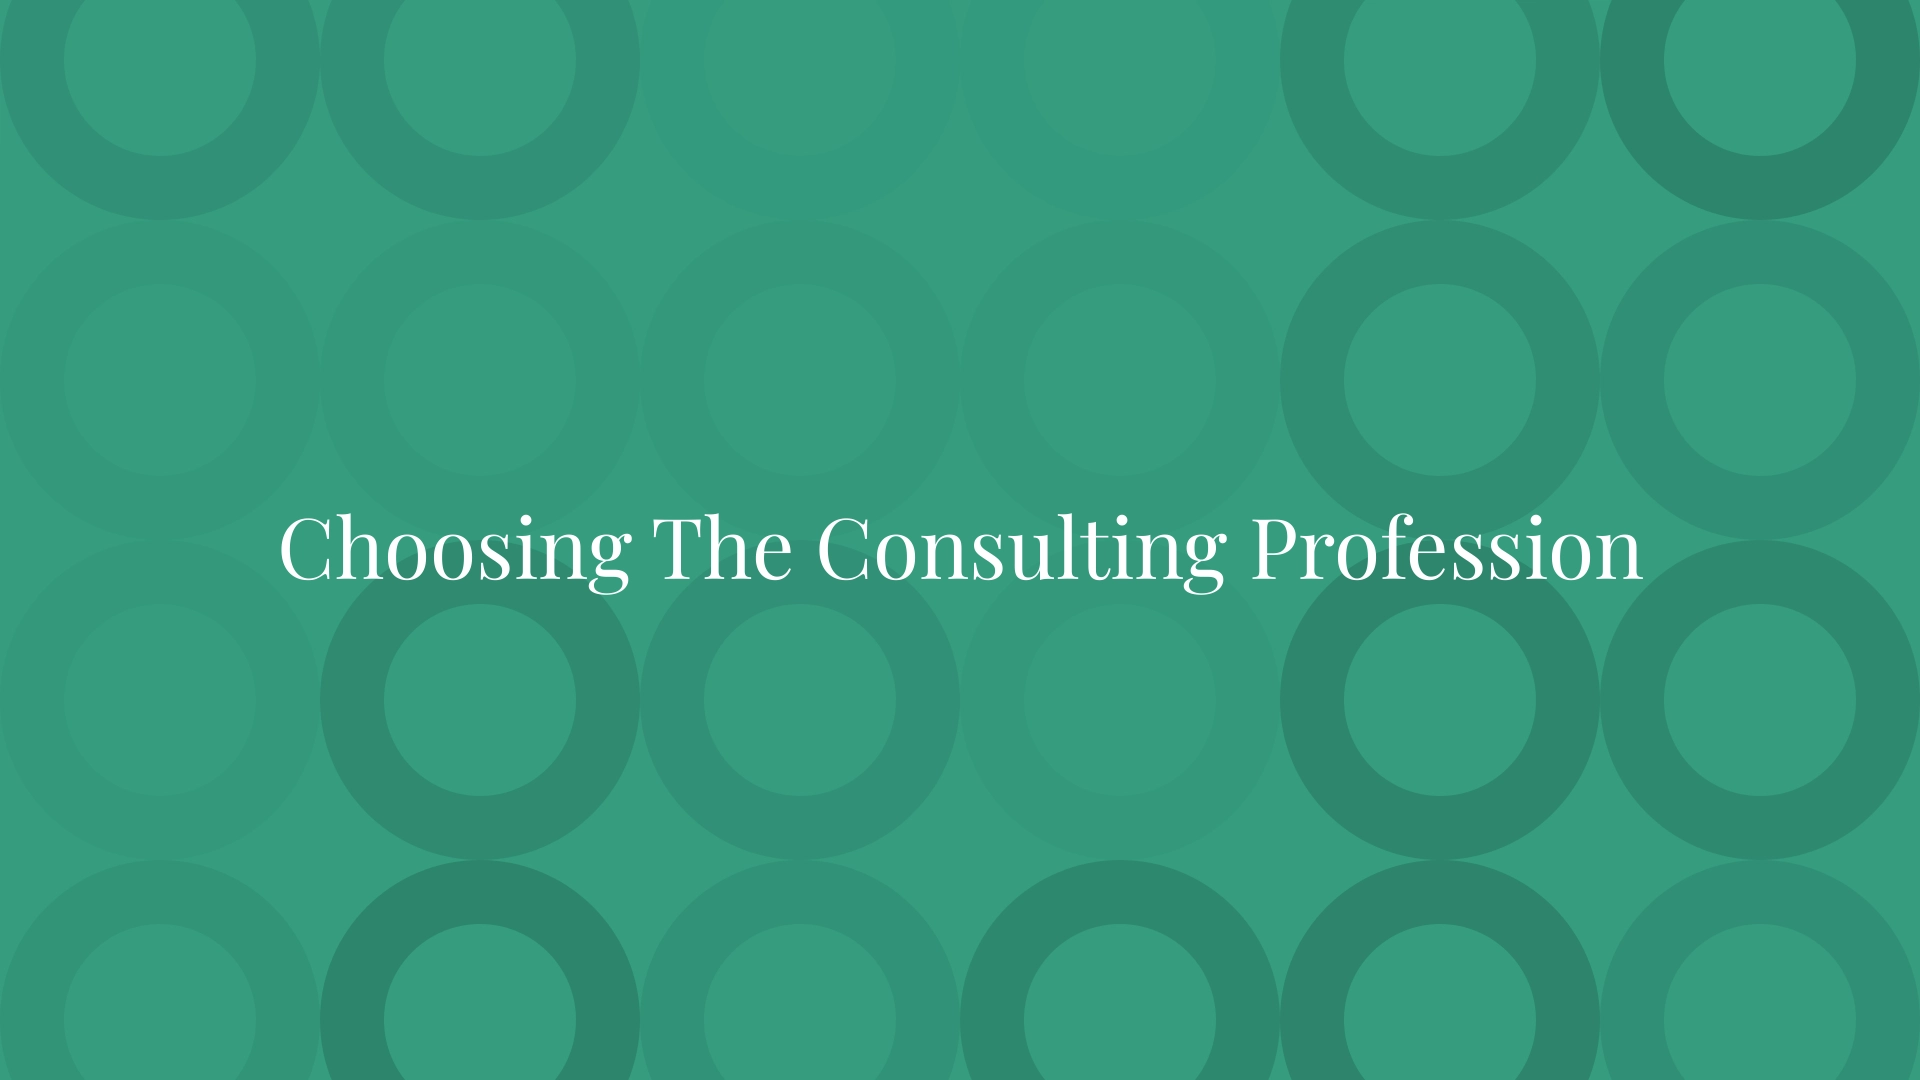 Choosing The Consulting Profession